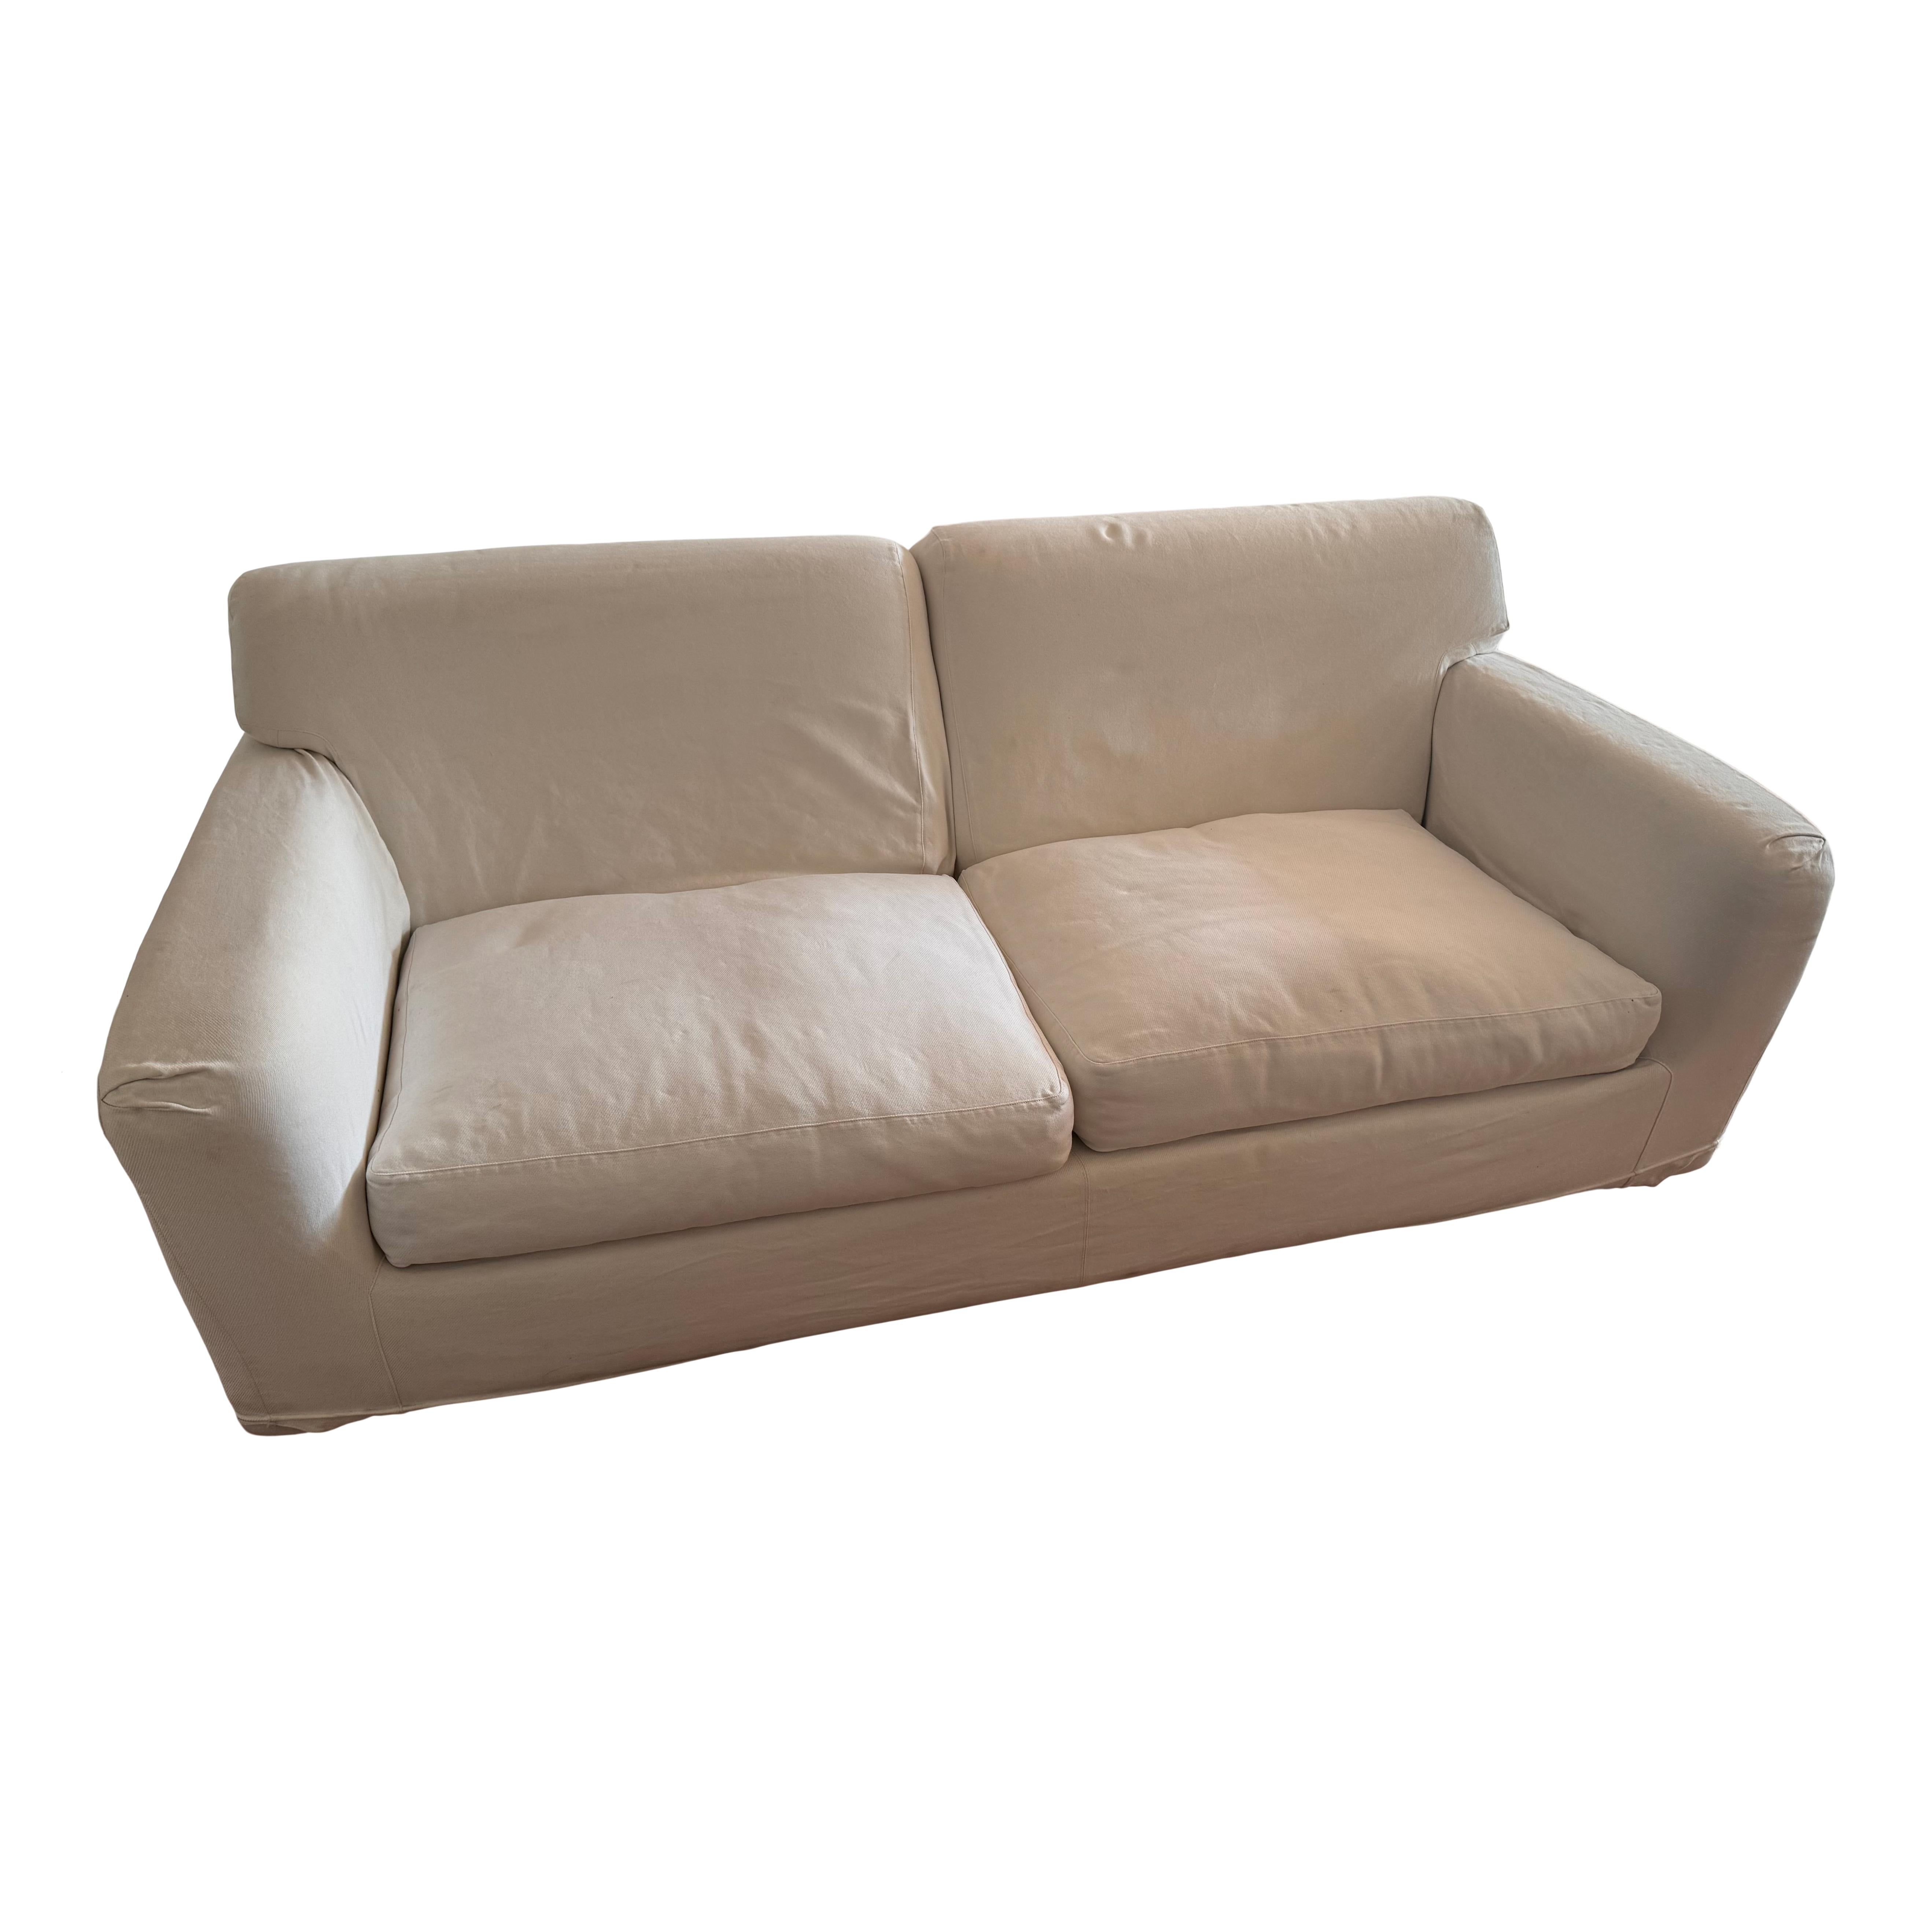 Hovercraft is a two-seater sofa with a wooden frame and internal padding made of polyurethane foam. The down cushions are reinforced with polyurethane foam, and the upholstery is fully removable. The sofa also features adjustable feet.
The sofa